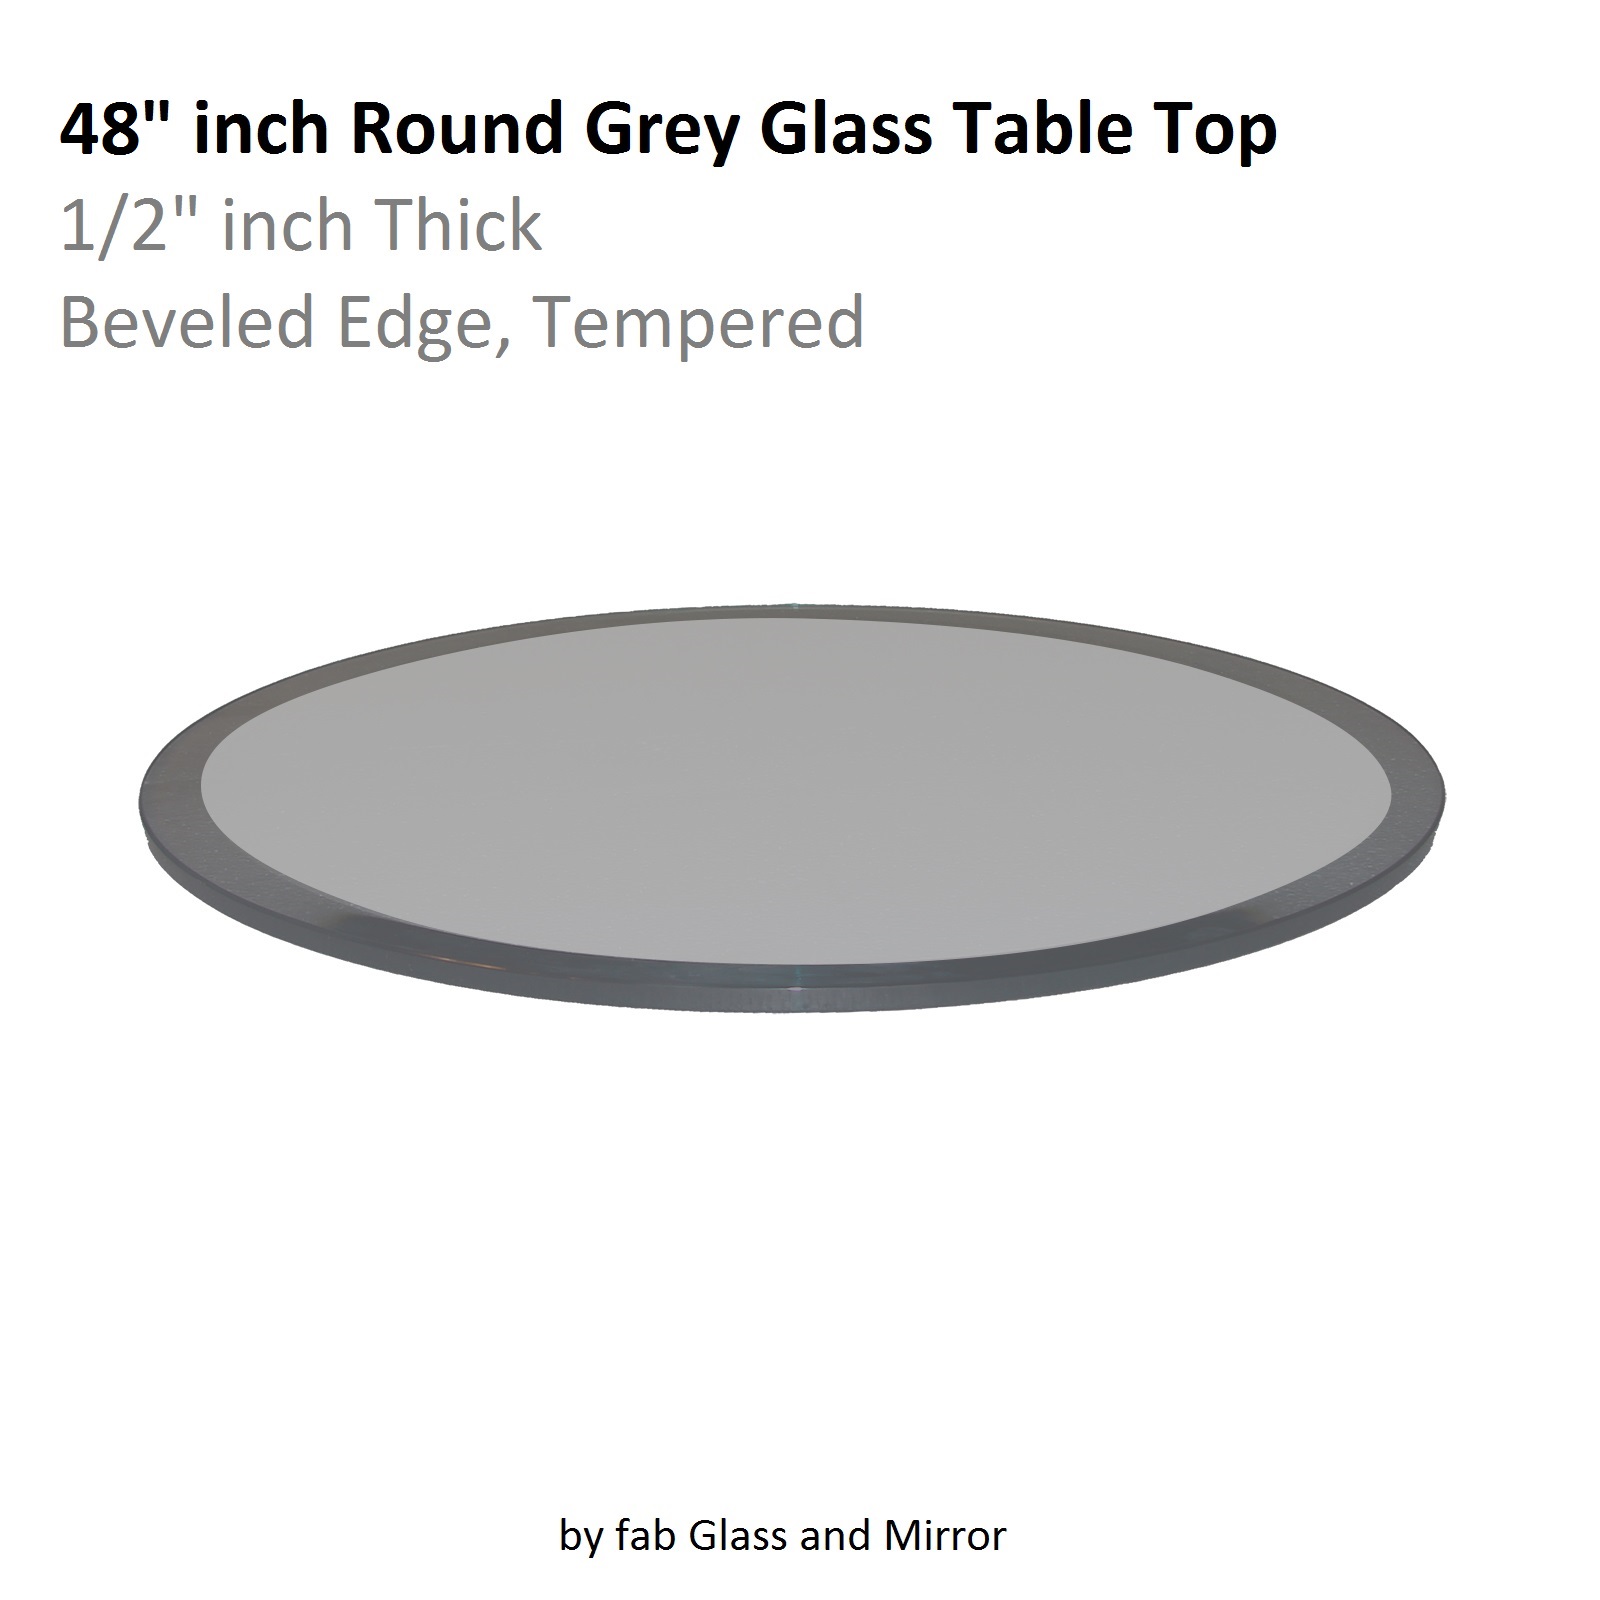 Grey Glass Table Top 48 Inch Round, 48 Inch Round Tempered Glass Table Top